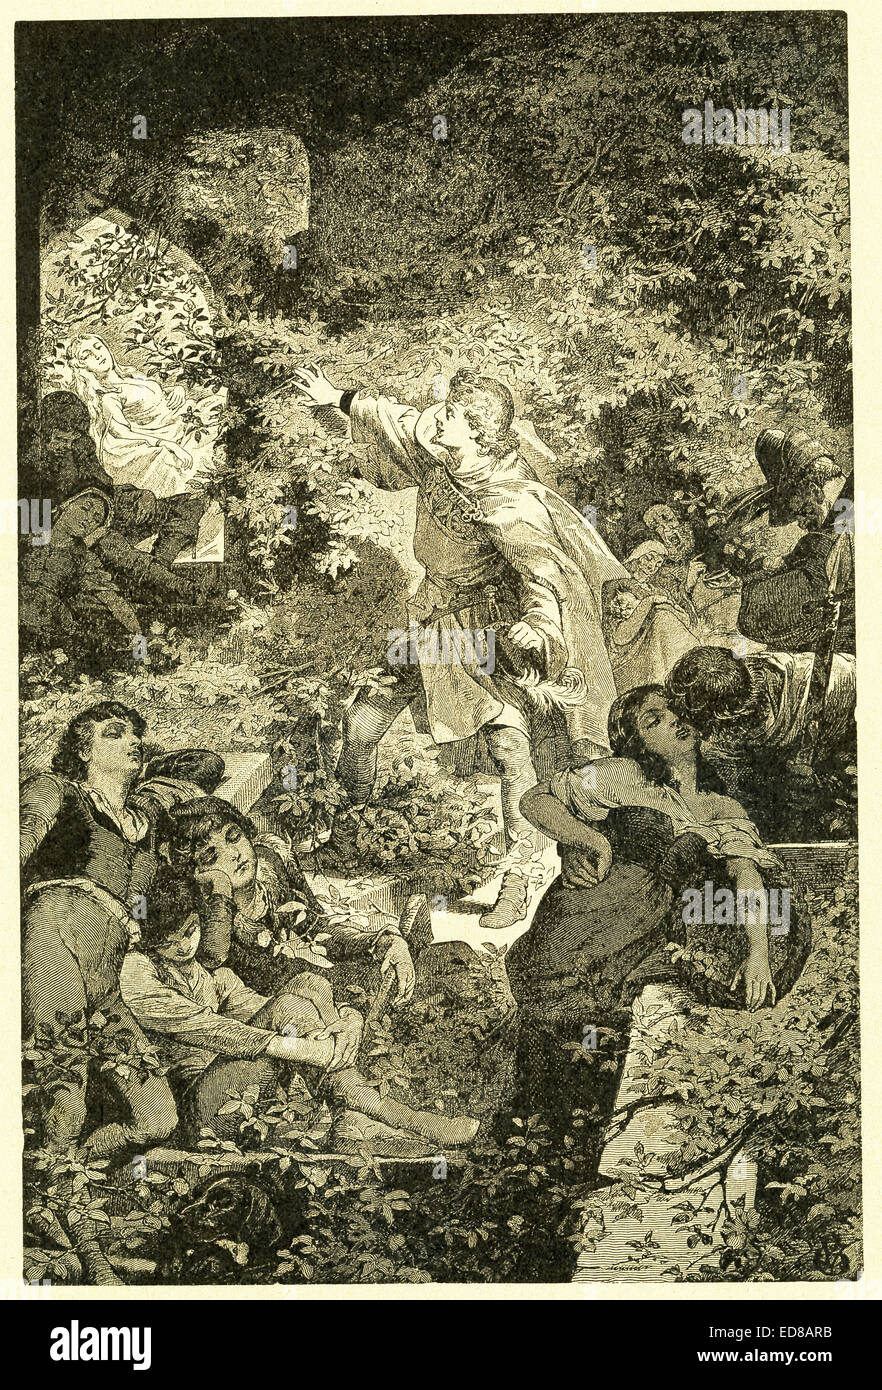 In 1812, the Grimm brothers, Jacob and Wilhelm, published Children and Household Tales, a collection German fairy tales. This illustration accompanied the tale 'Sleeping Beauty' and shows the princess Rosamond asleep and being seen by the prince, who will kiss her and wake her form her 100-year sleep. This image is from Grimms Eventyr (Grimm's Fairy Tales) by Carl Ewald, published in 1922. The frontispiece has the illustrations by Philip Grot Johann and R. Leinweber. Johann was a well-known German illustrator and did pieces for Goethe. Stock Photo